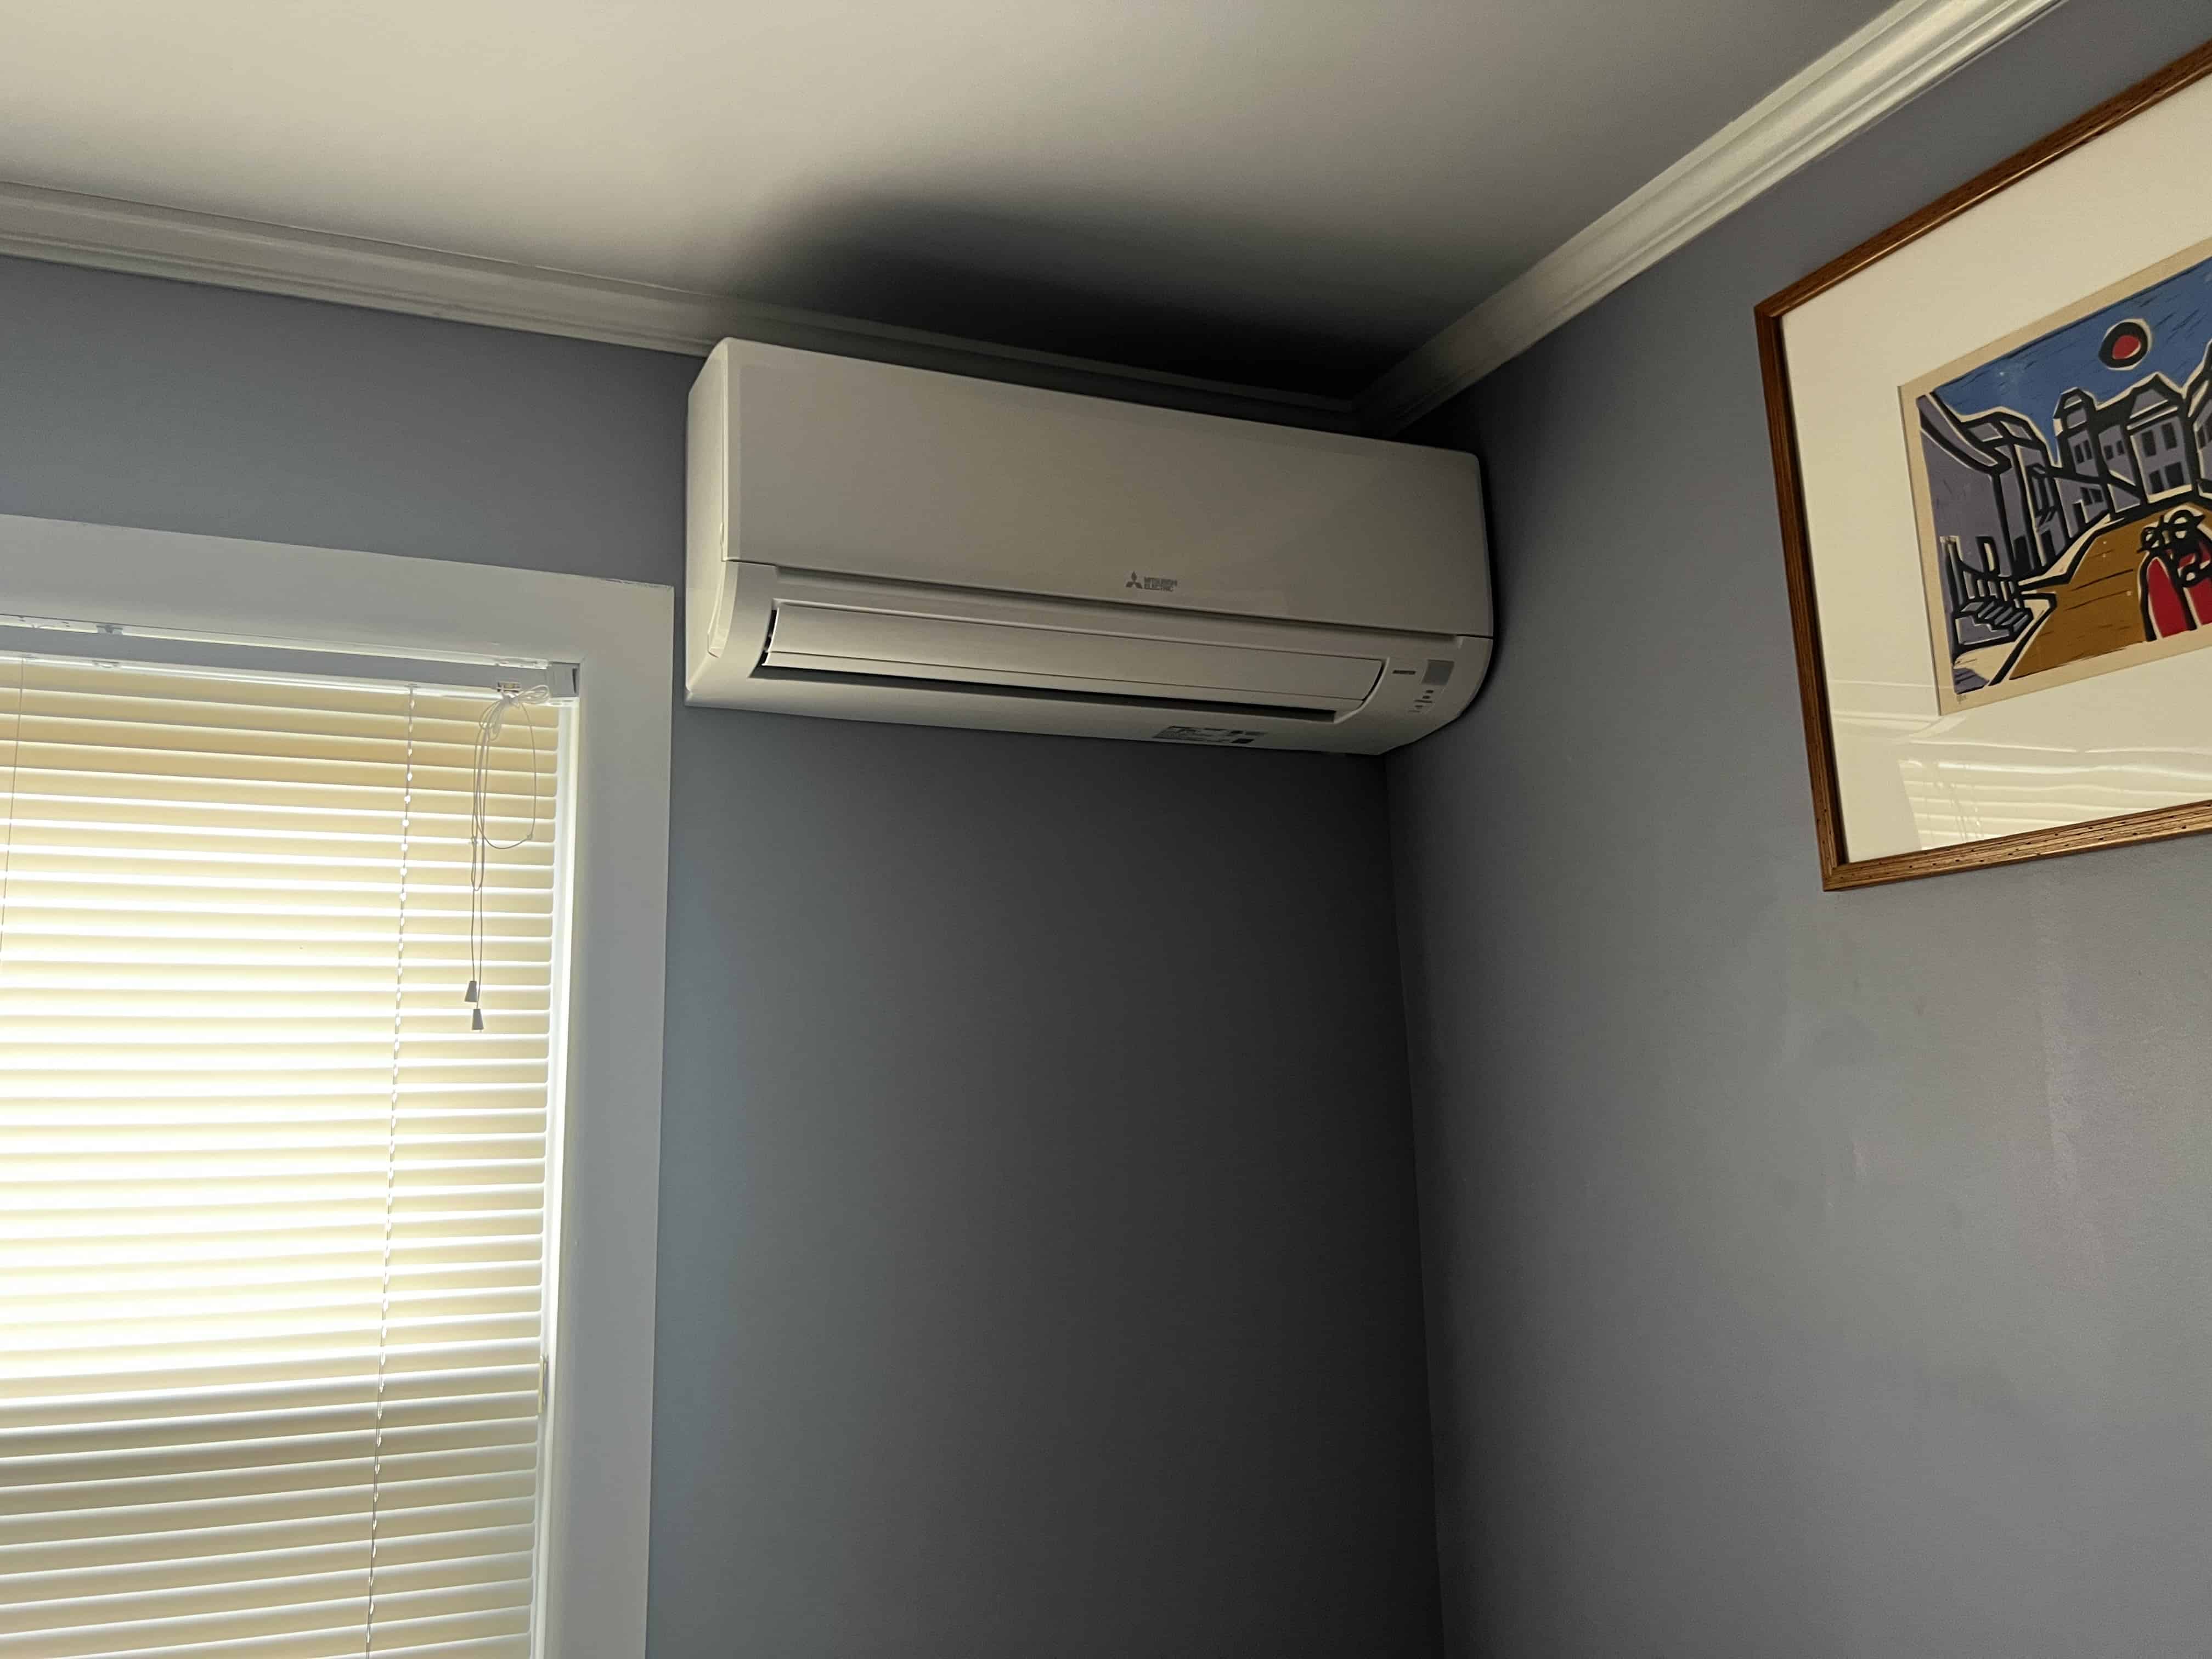 Are Heat Pumps and Mini Splits the Same: An Inspection Article That Will Answer the Question